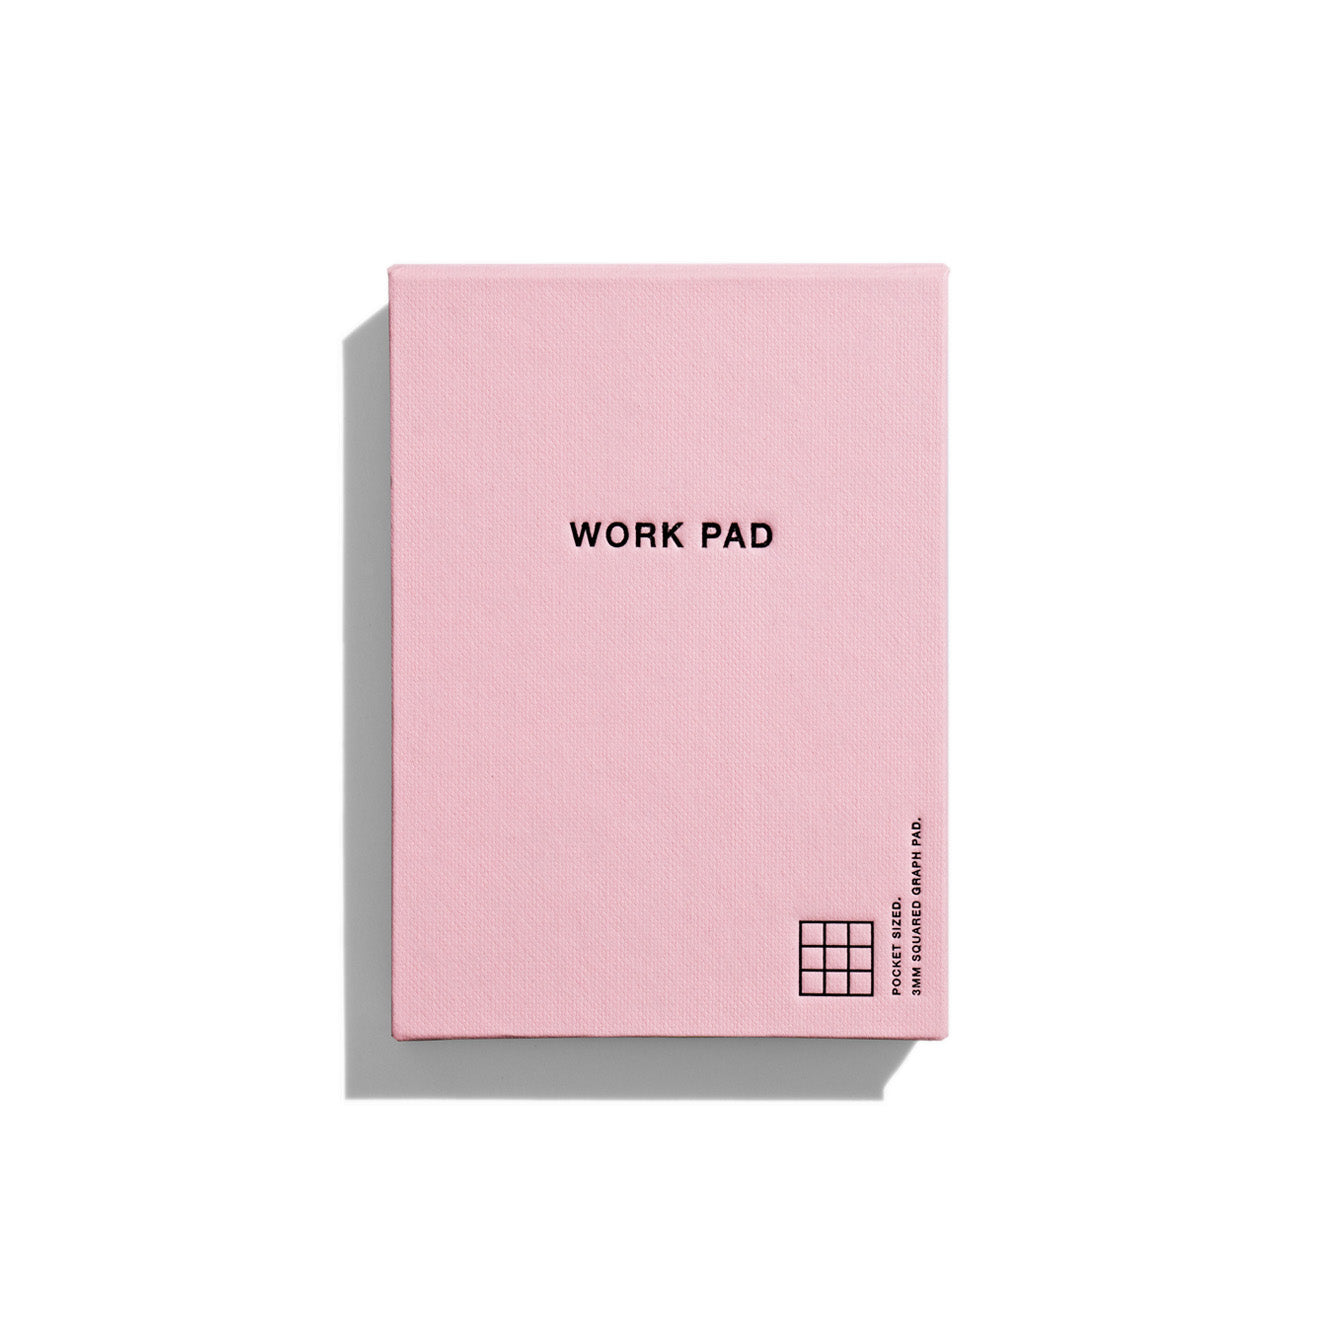 Before Breakfast Work Pad Powder Pink - Made in London - fountain pen friendly notepad